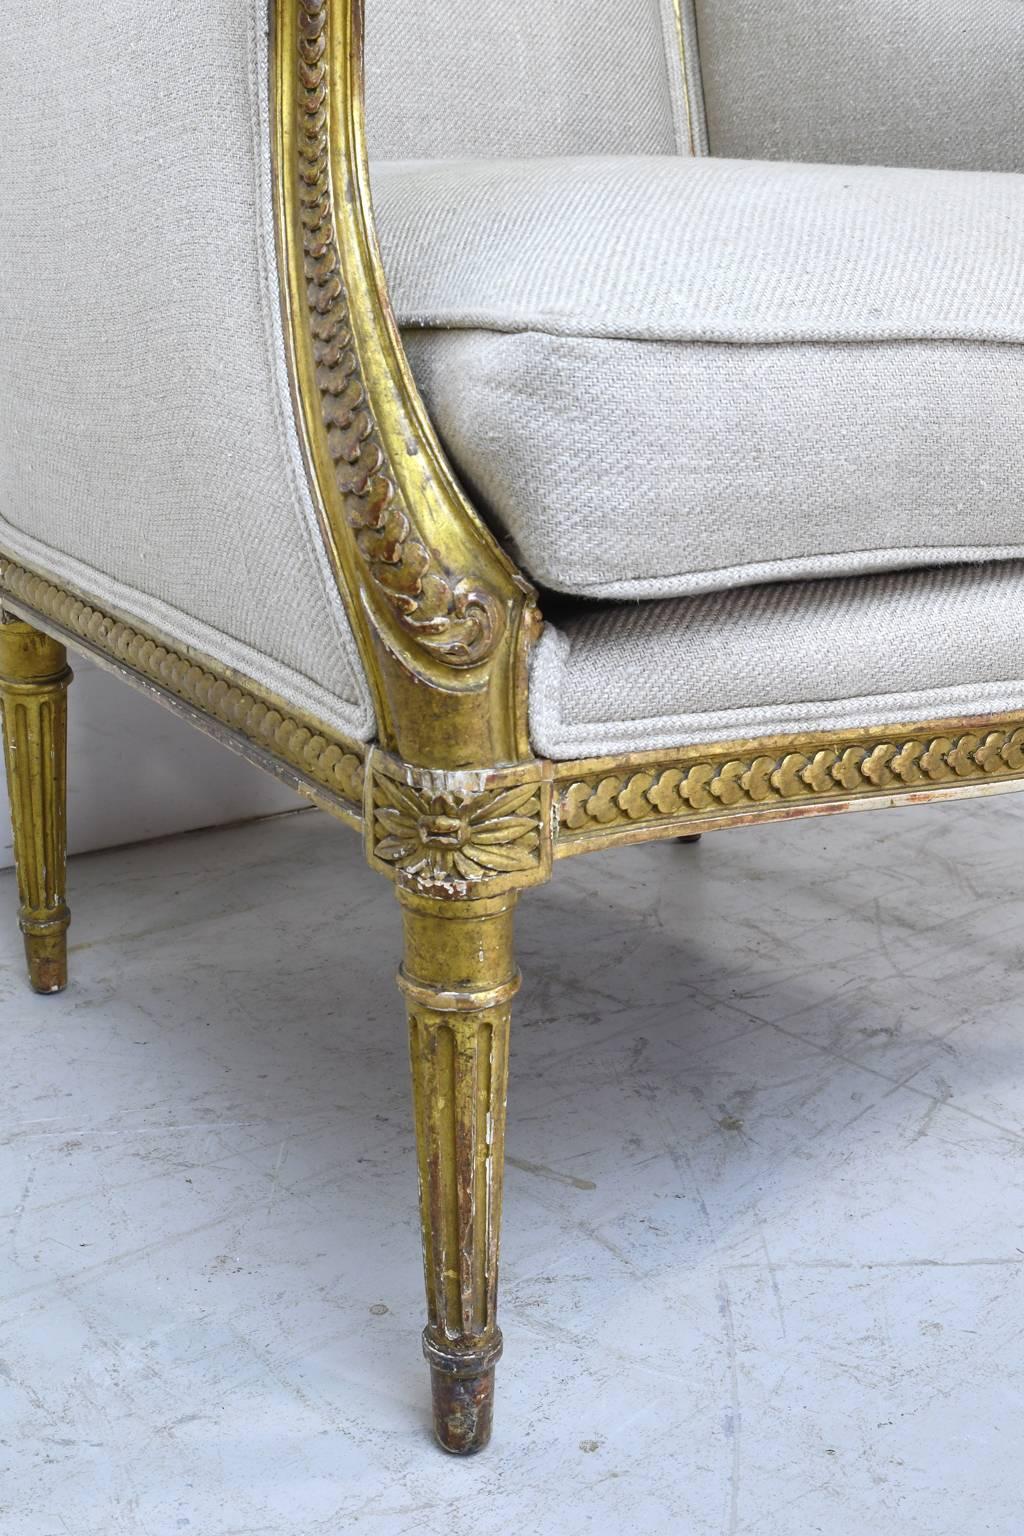 18th Century French Louis XVI Giltwood Bergère or Wingback Chair with Upholstery 2